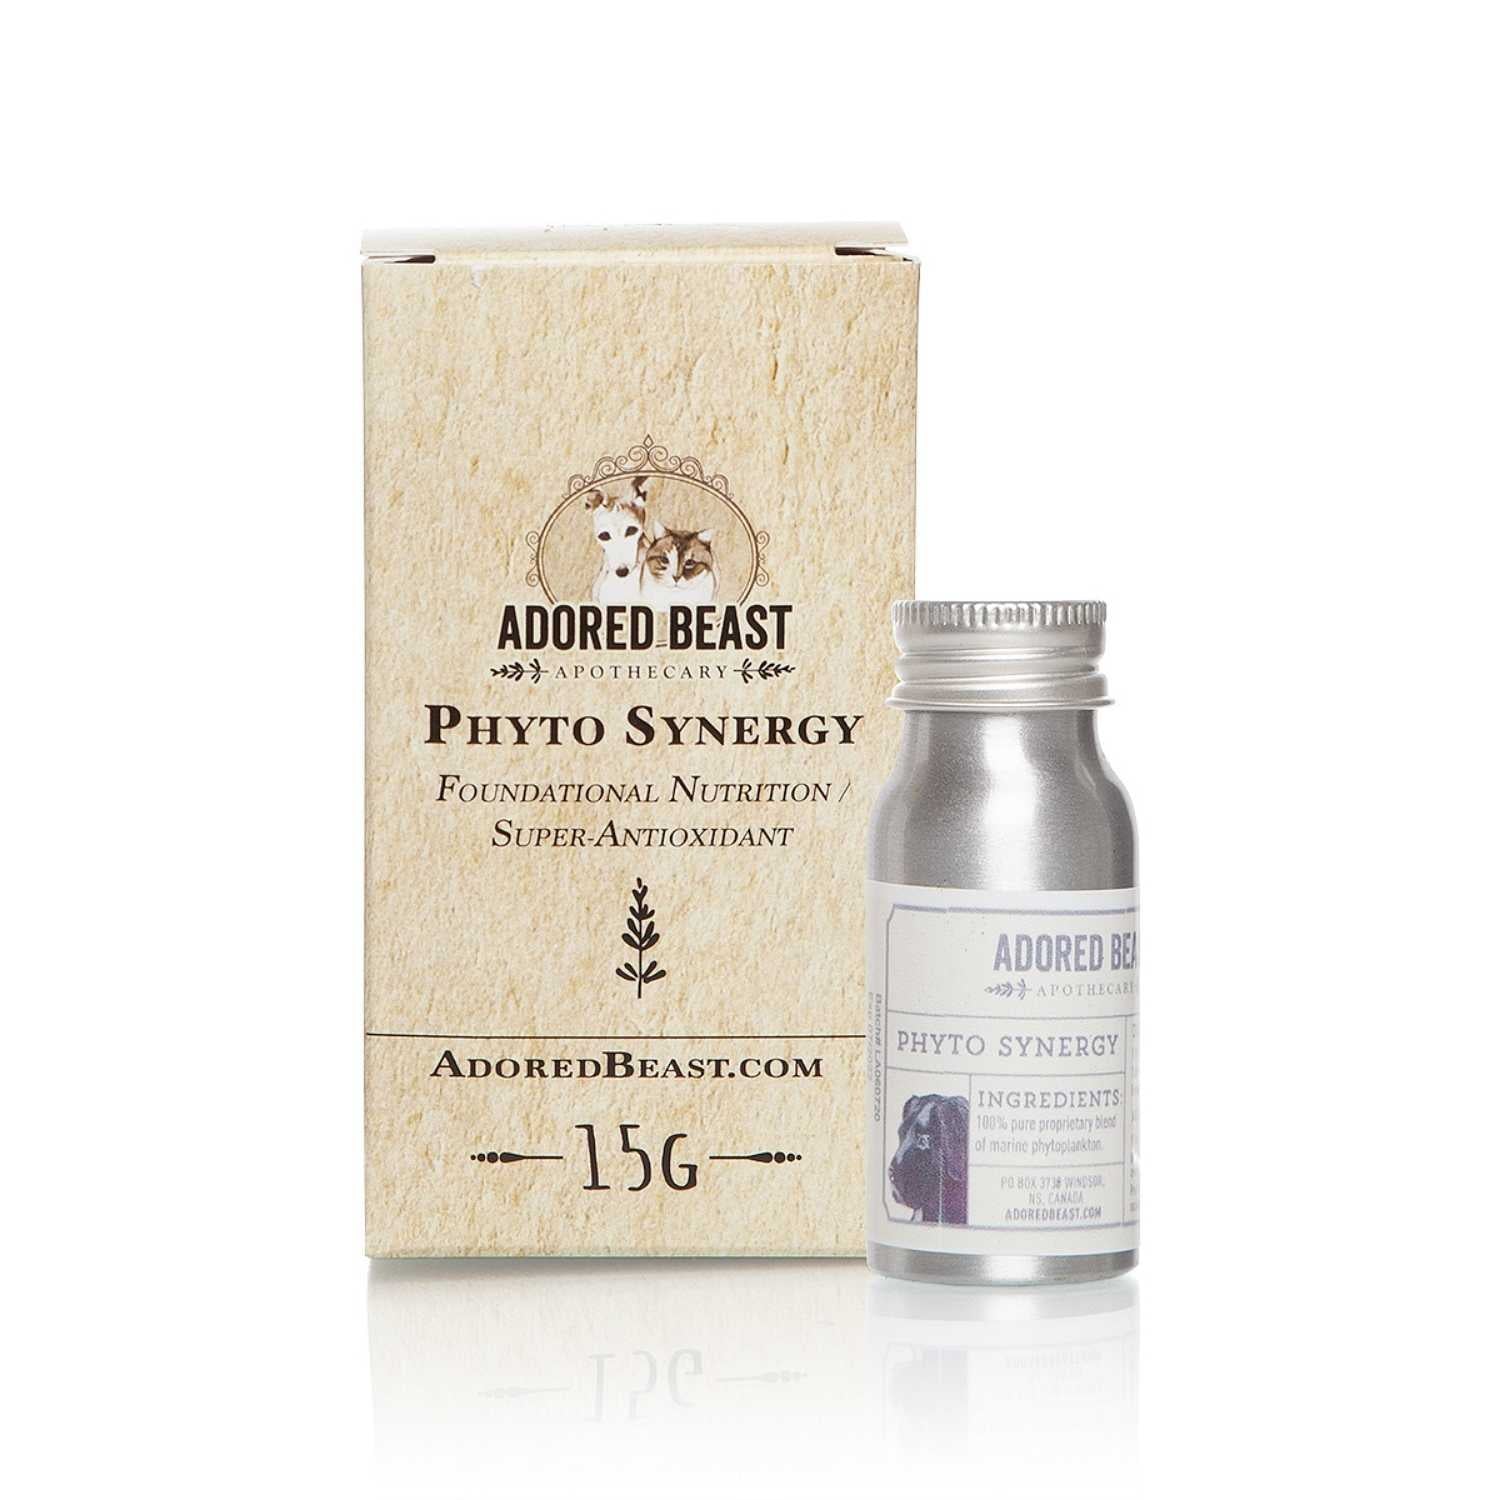 Adored Beast - Phyto Synergy - Pet 15g Supplement